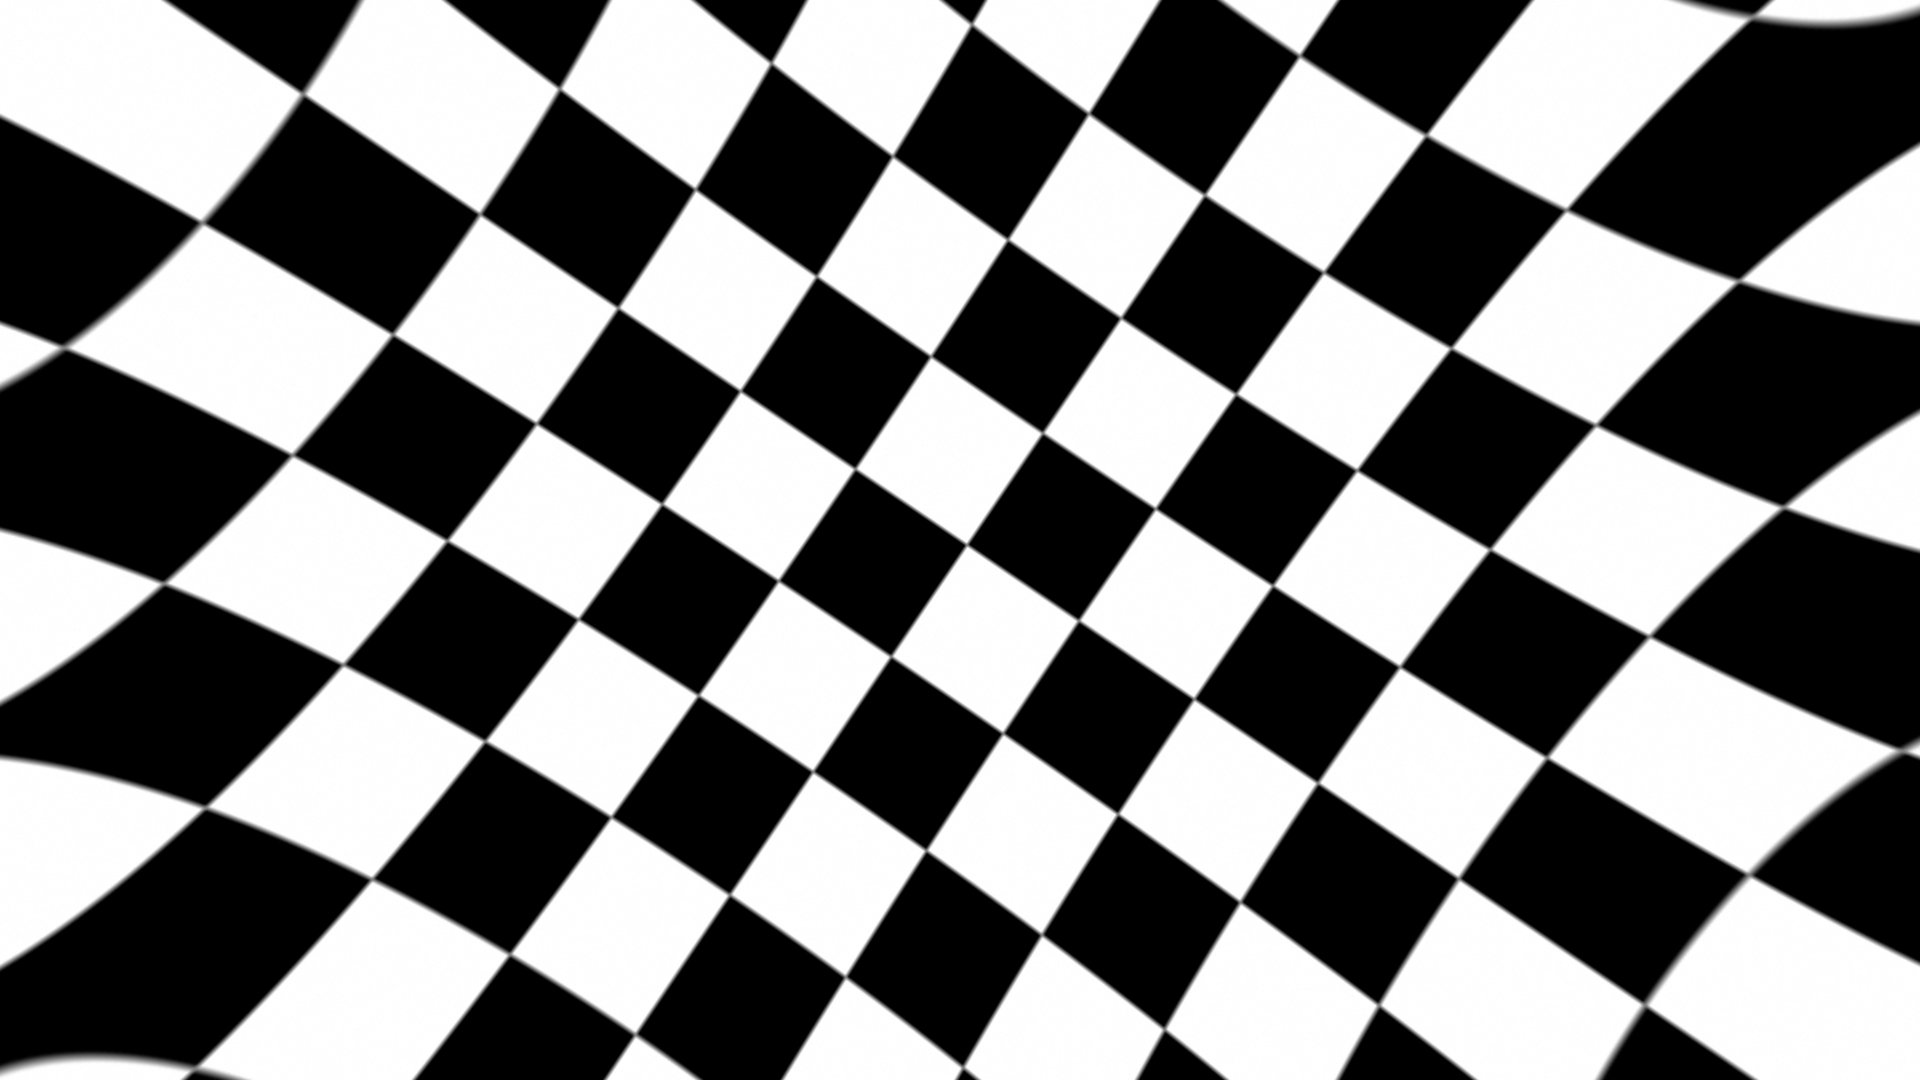 SeeingSounds_TheAlphaPack_Checkerboard3_BlackThumbnail.jpg